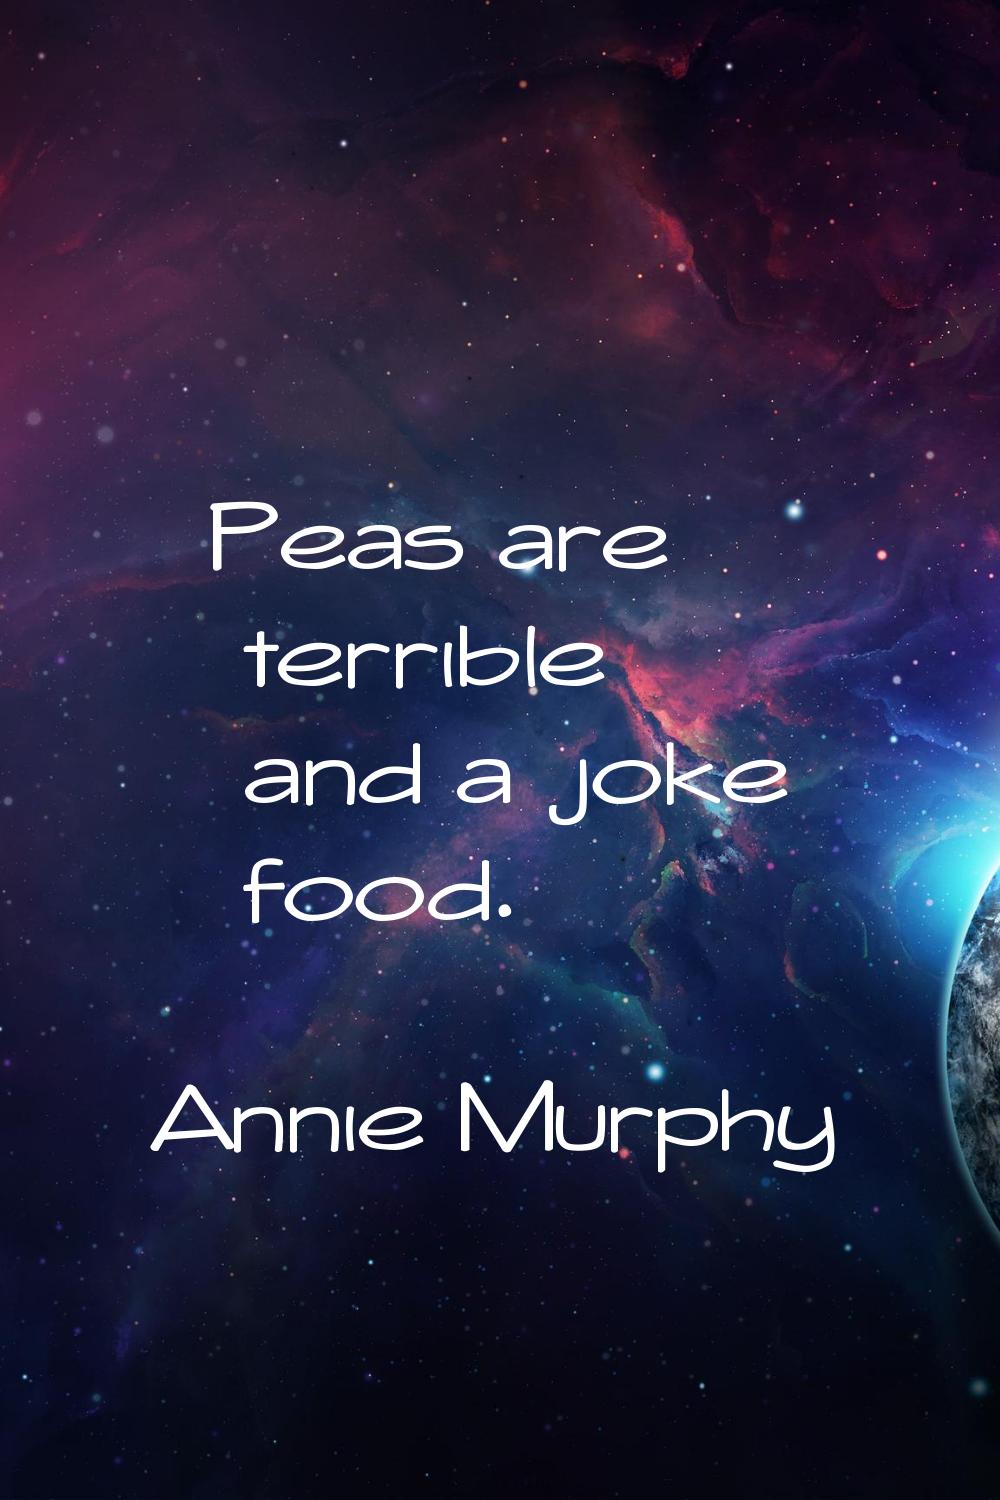 Peas are terrible and a joke food.